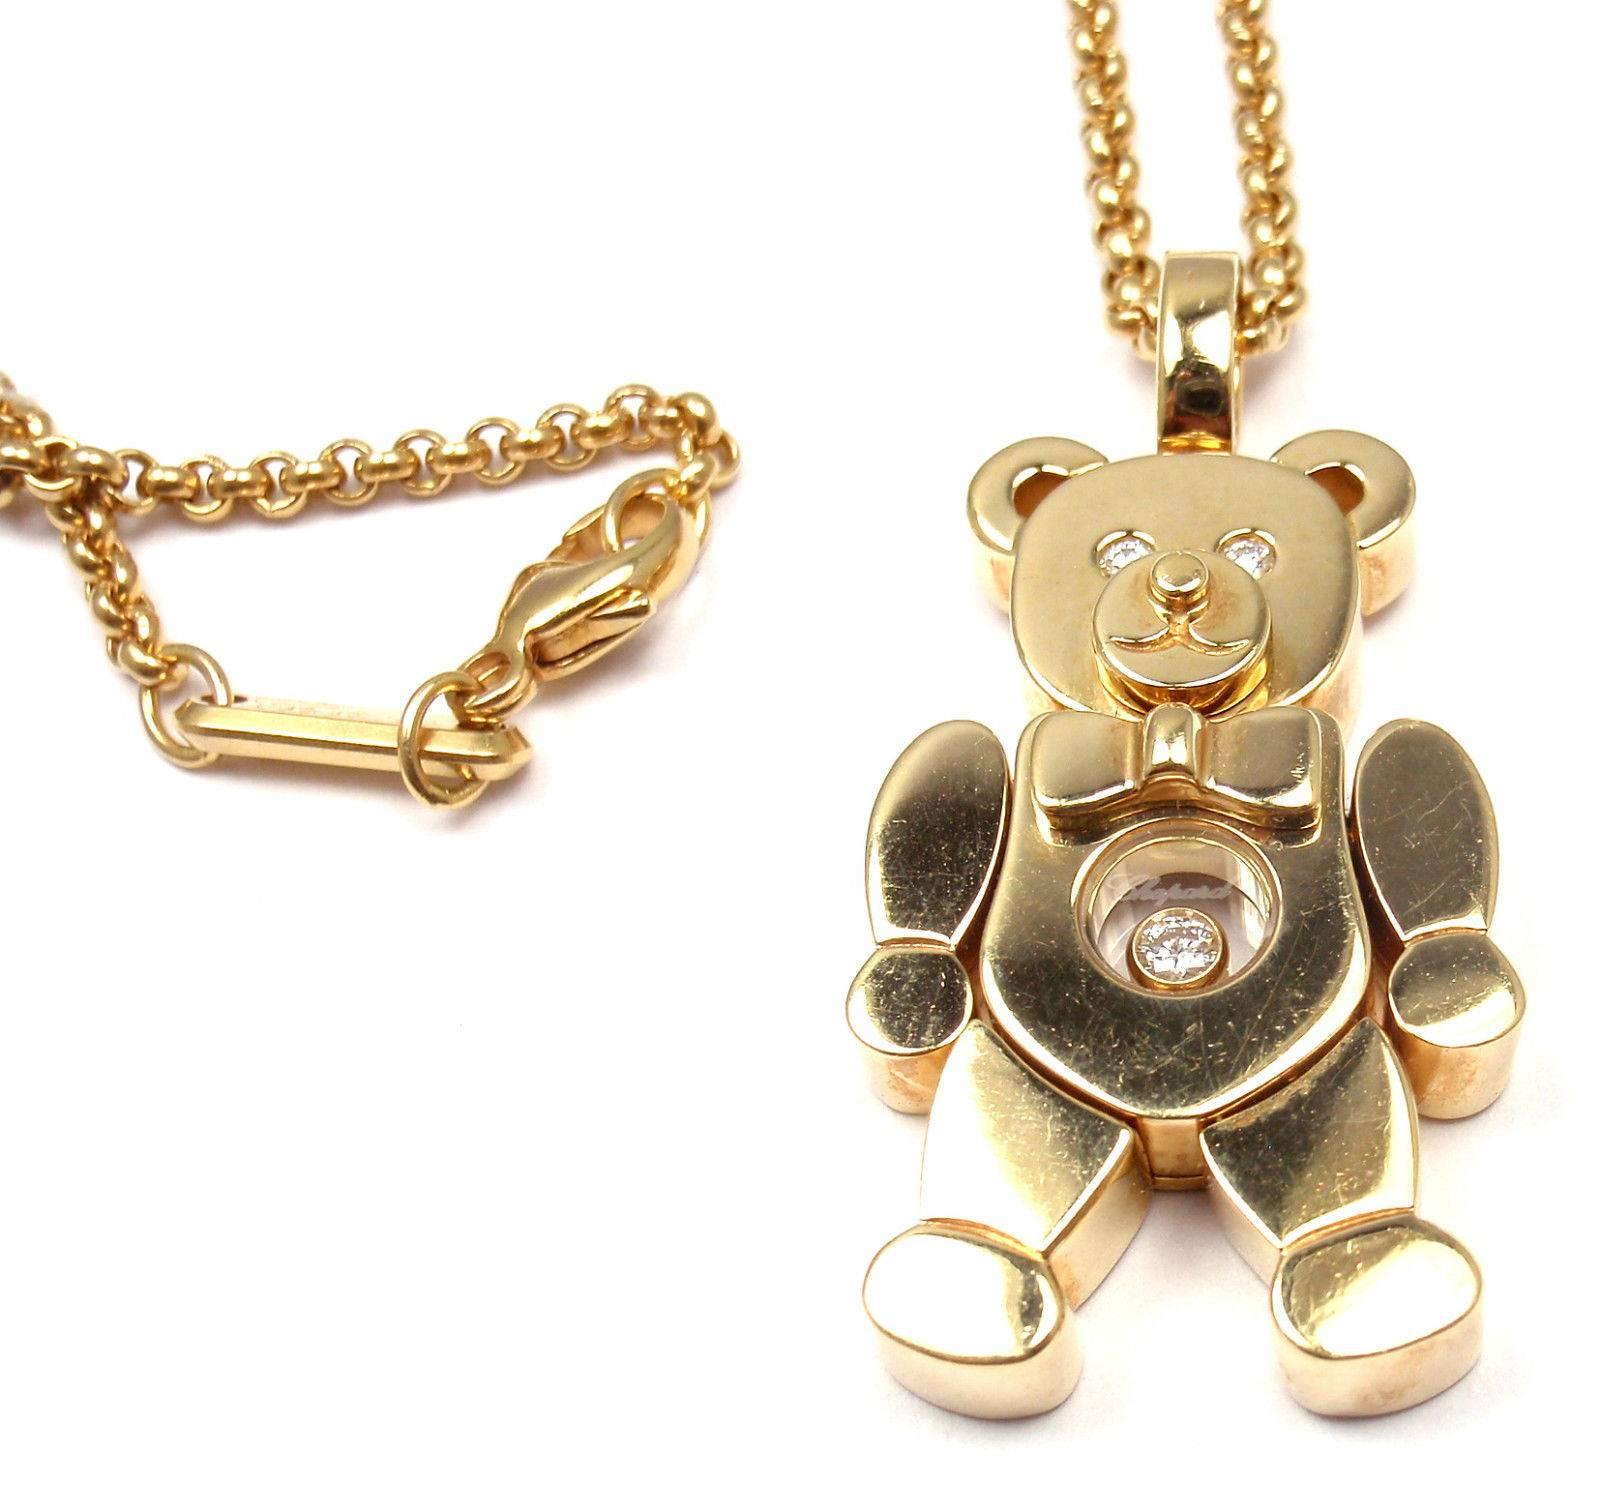 18k Yellow Gold Happy Diamond Teddy Bear Pendant Necklace  by Chopard.  With Round Brilliant Cut Diamonds VS1 total weight approx. .10ct
Details: 
Chain Length: 16.6